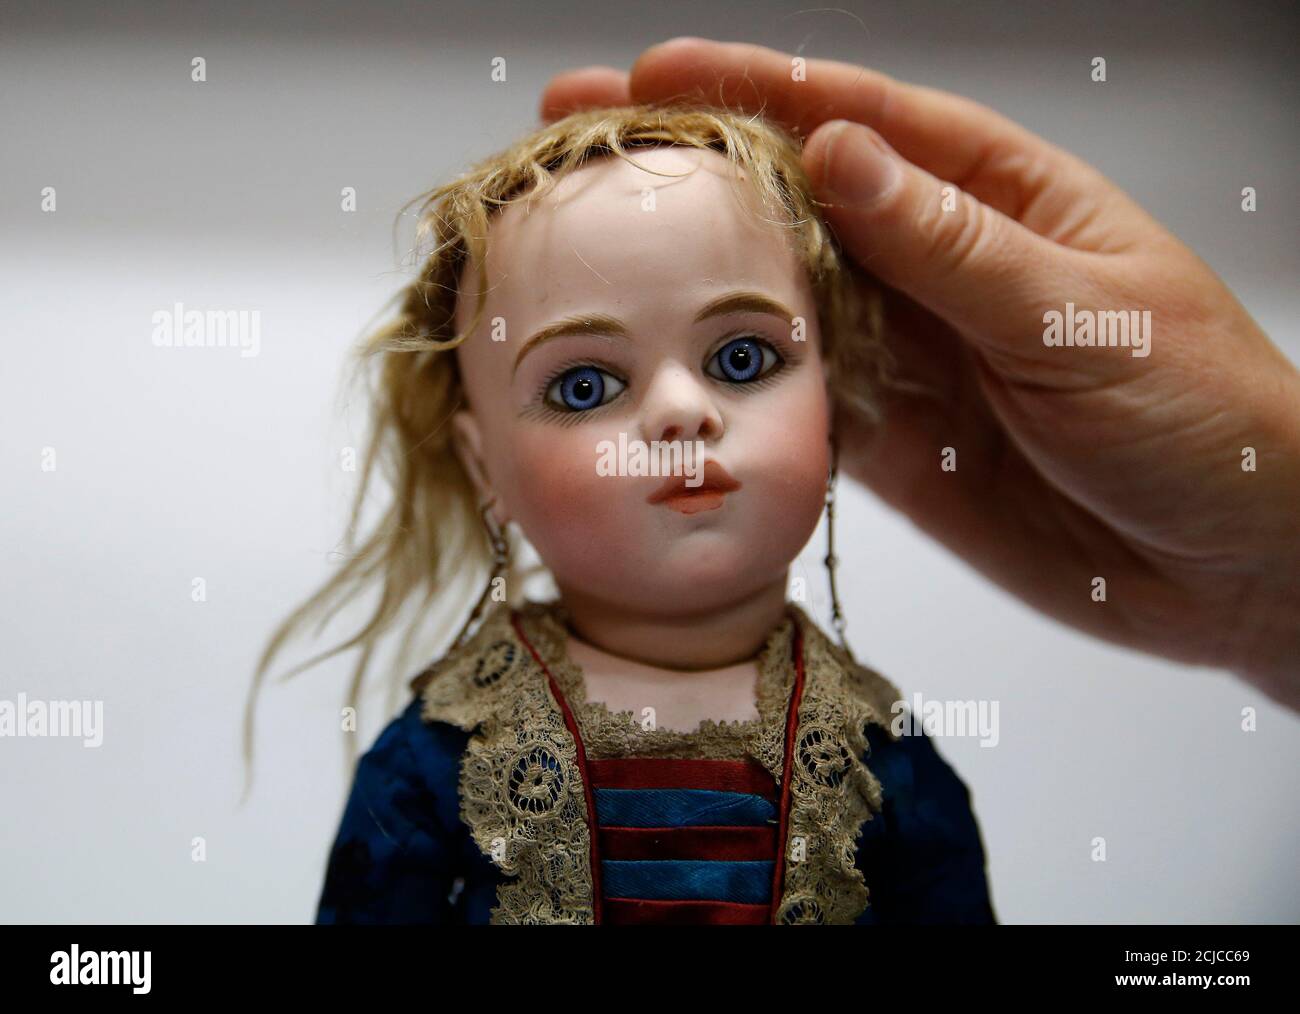 A worker adjusts the hair on a French bisque doll at the Vectis auction  house in Stockton-on-Tees, Britain November 23, 2015. The doll from  approximately 1880 is estimated to sell for 6000-8000